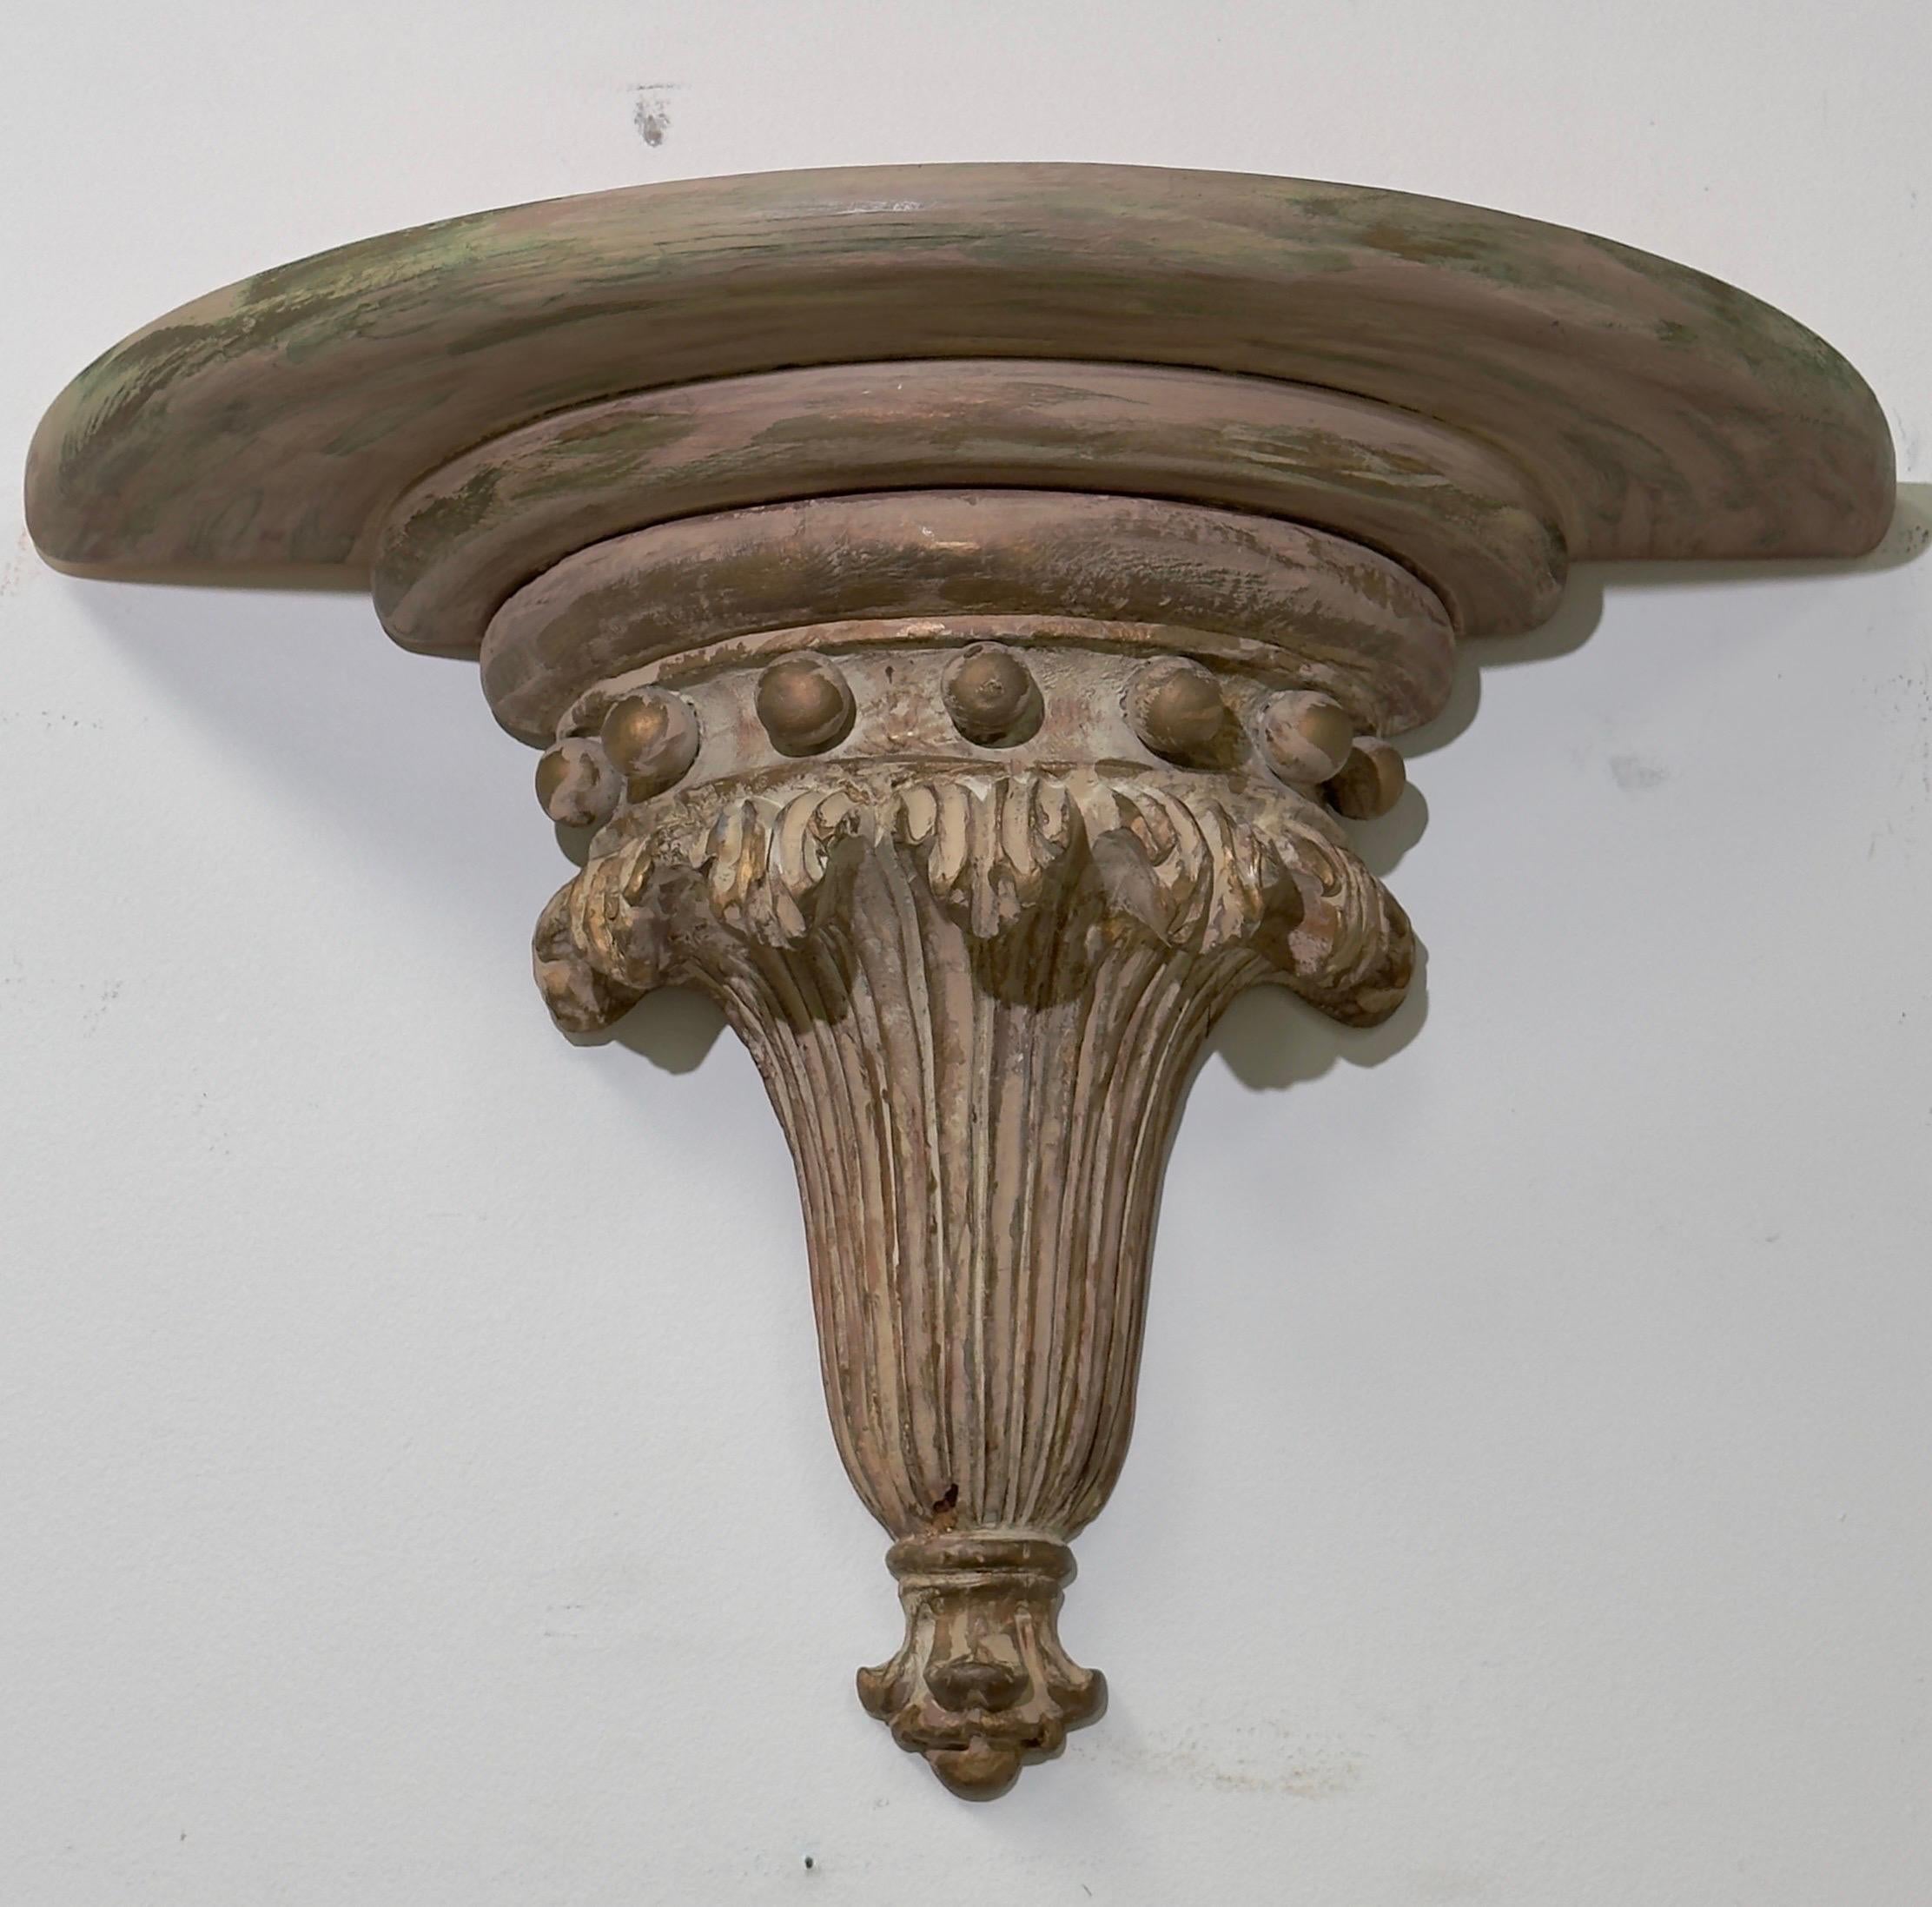 A pair of Italian neoclassical wall shelves or brackets. Crafted with meticulous attention to detail, these brackets boast intricate carvings in a graceful shell and ball design. Fashioned from wood with a charming pickled finish, they exude a